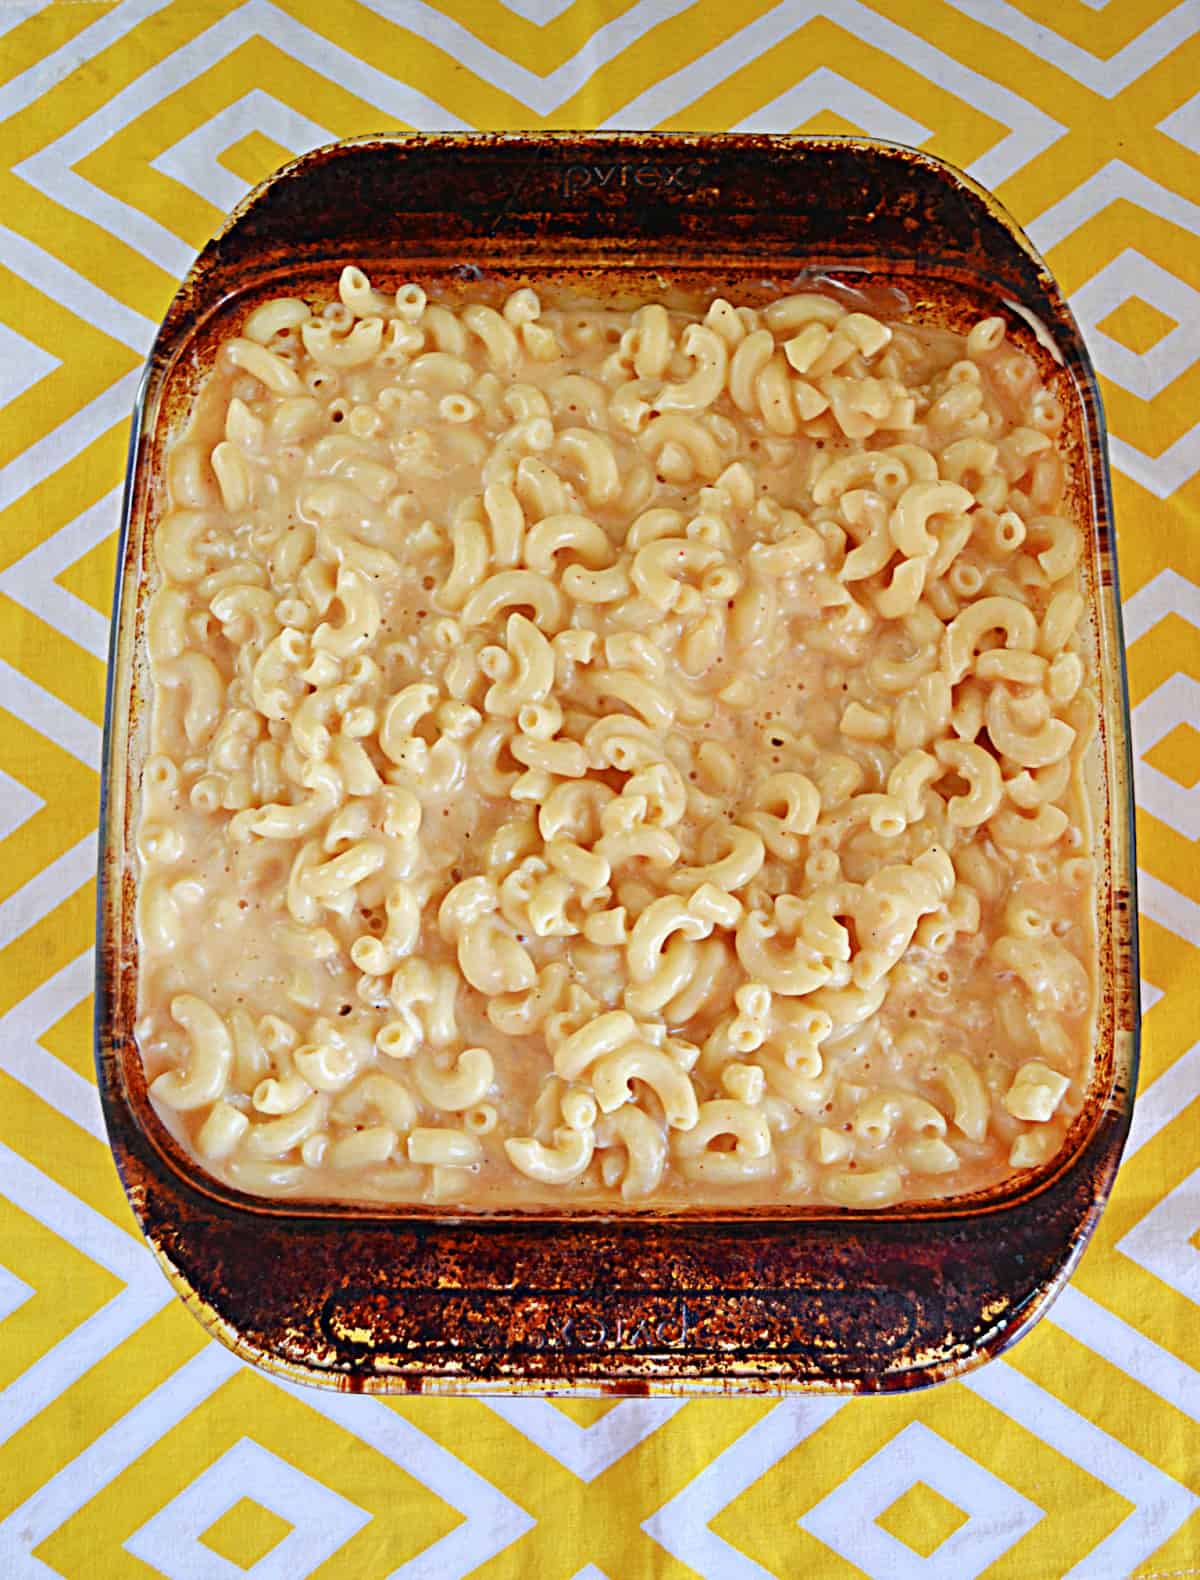 A baking dish of macaroni and cheese